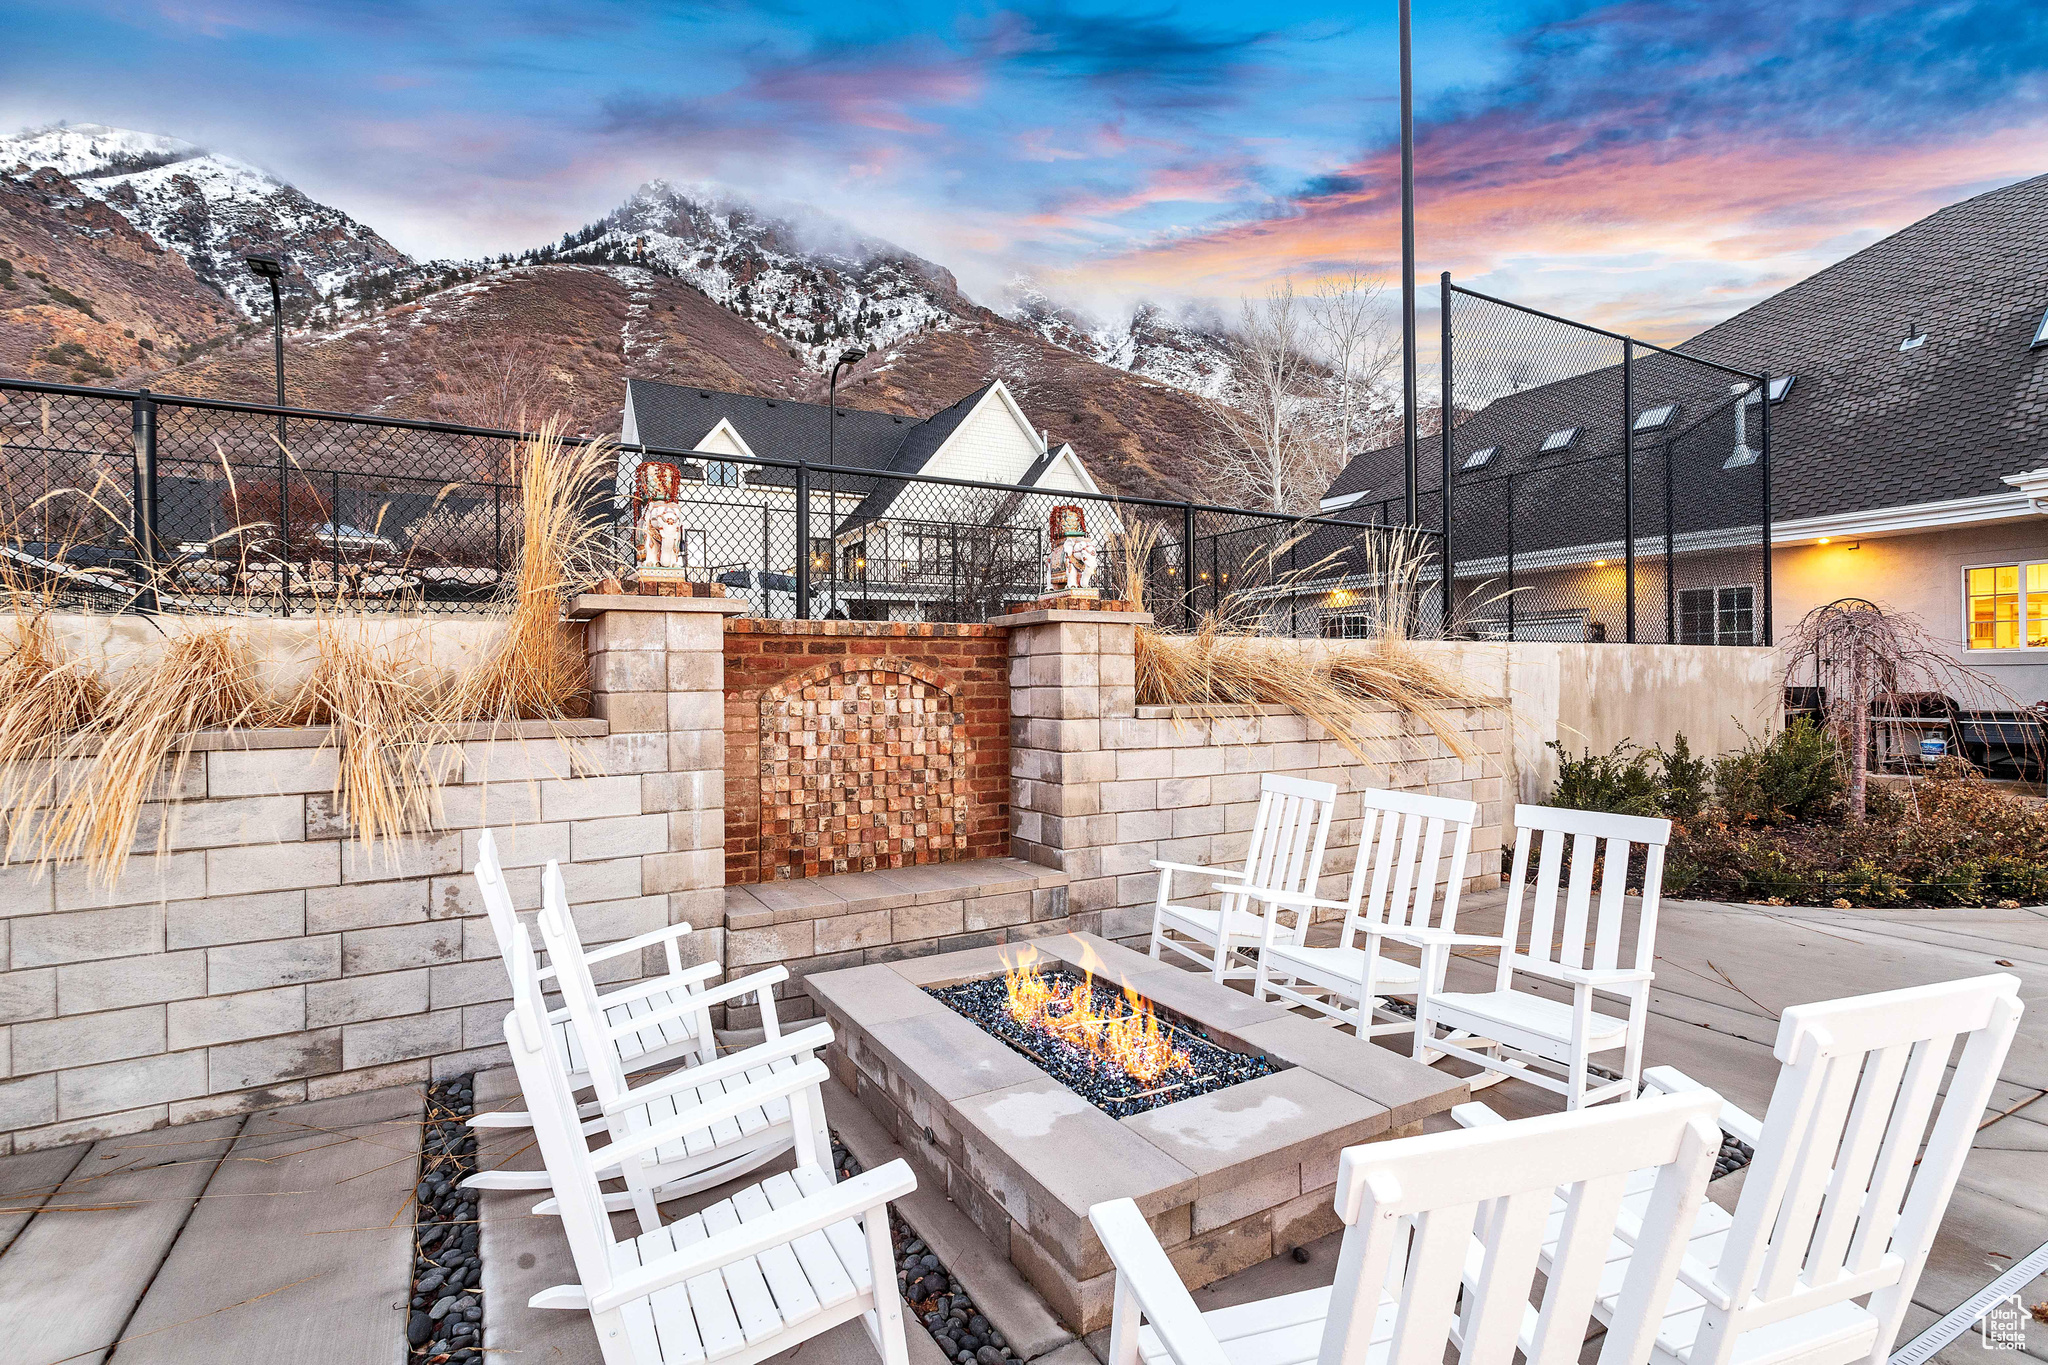 Patio terrace at dusk featuring a mountain view and a fire pit